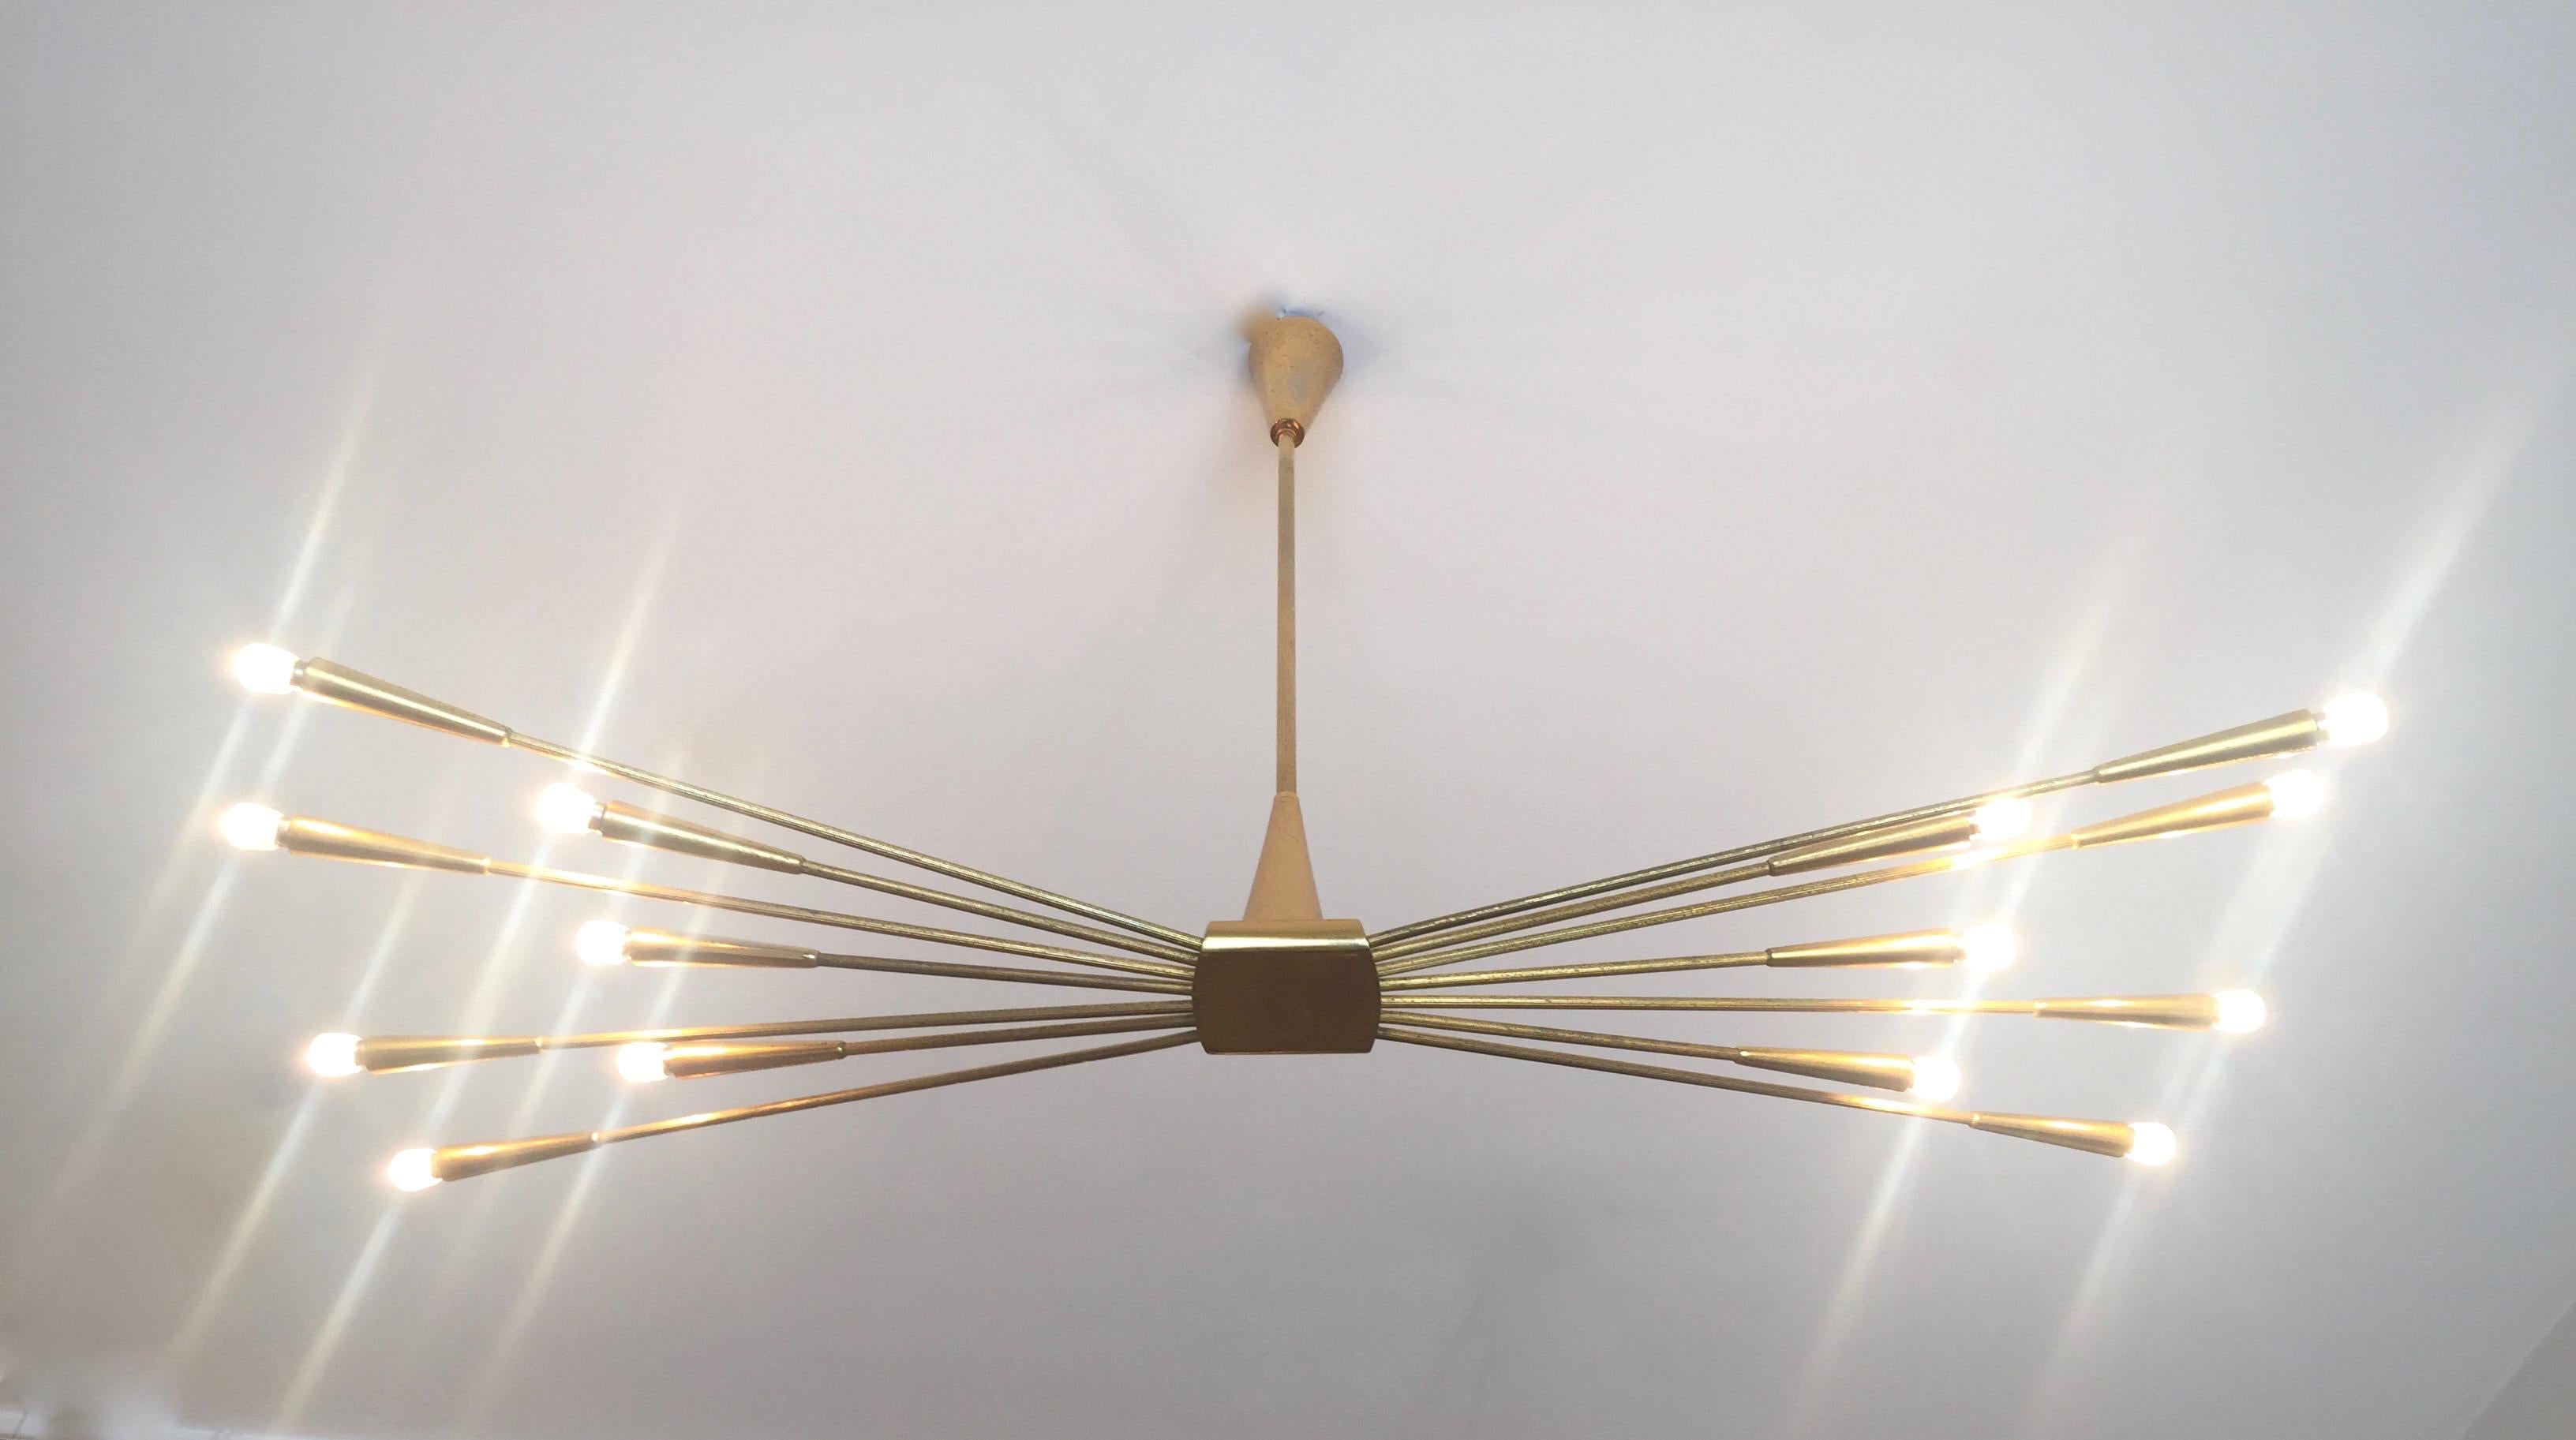 An superb original mirrored -polished brass chandelier designed by Oscar Torlasco and edited in the 50s. Brass frame and fourteen striated arms. Original label. Adjustable in height and rewired for USA use.